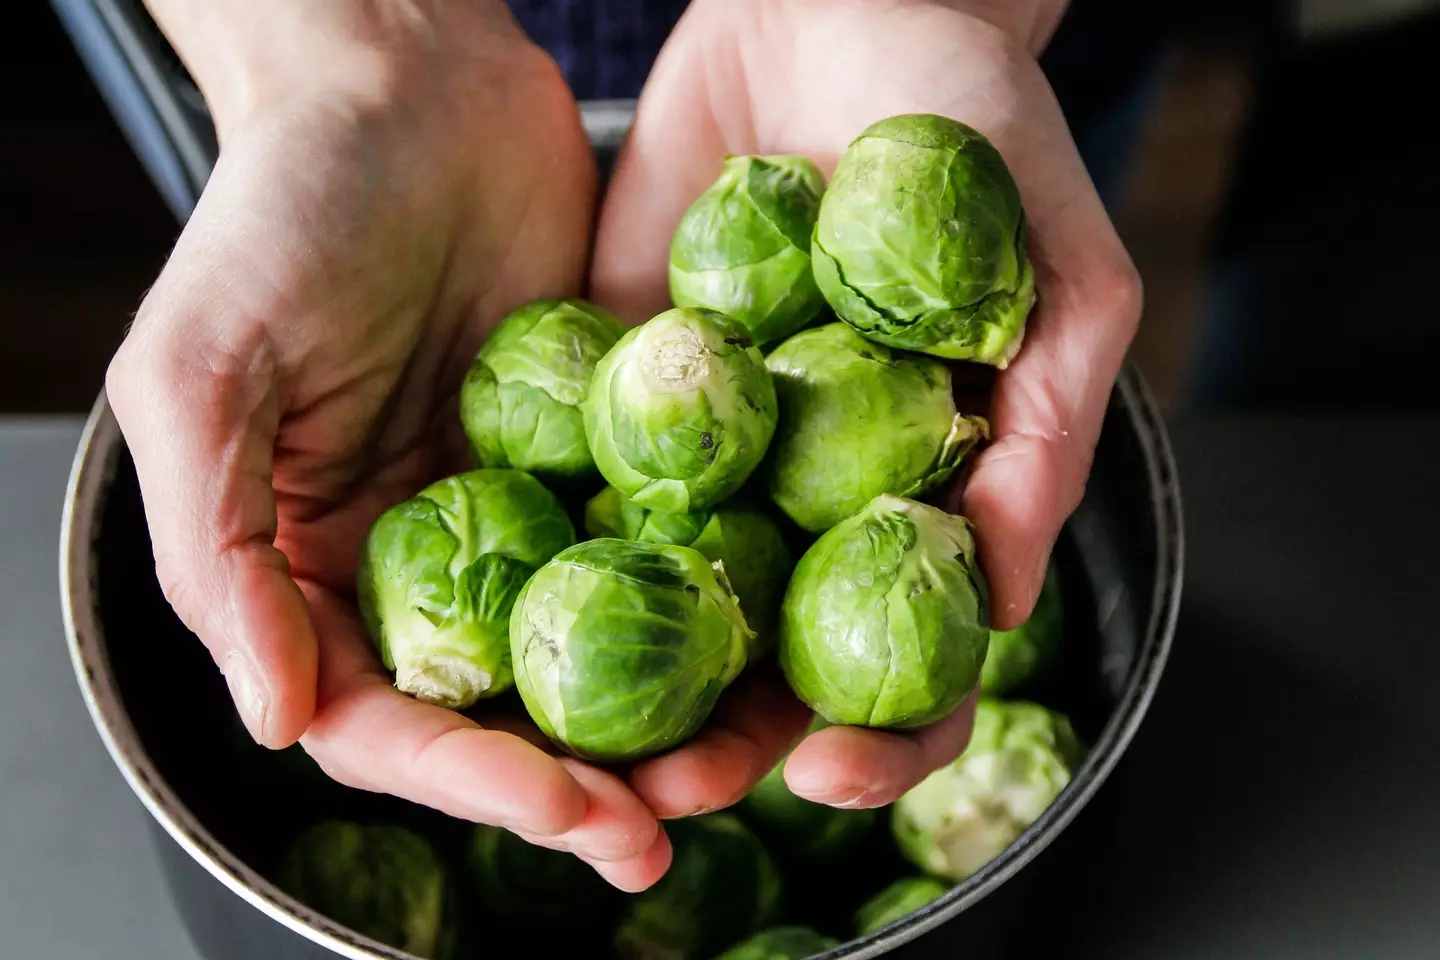 Sprouts are definitely best cooked.